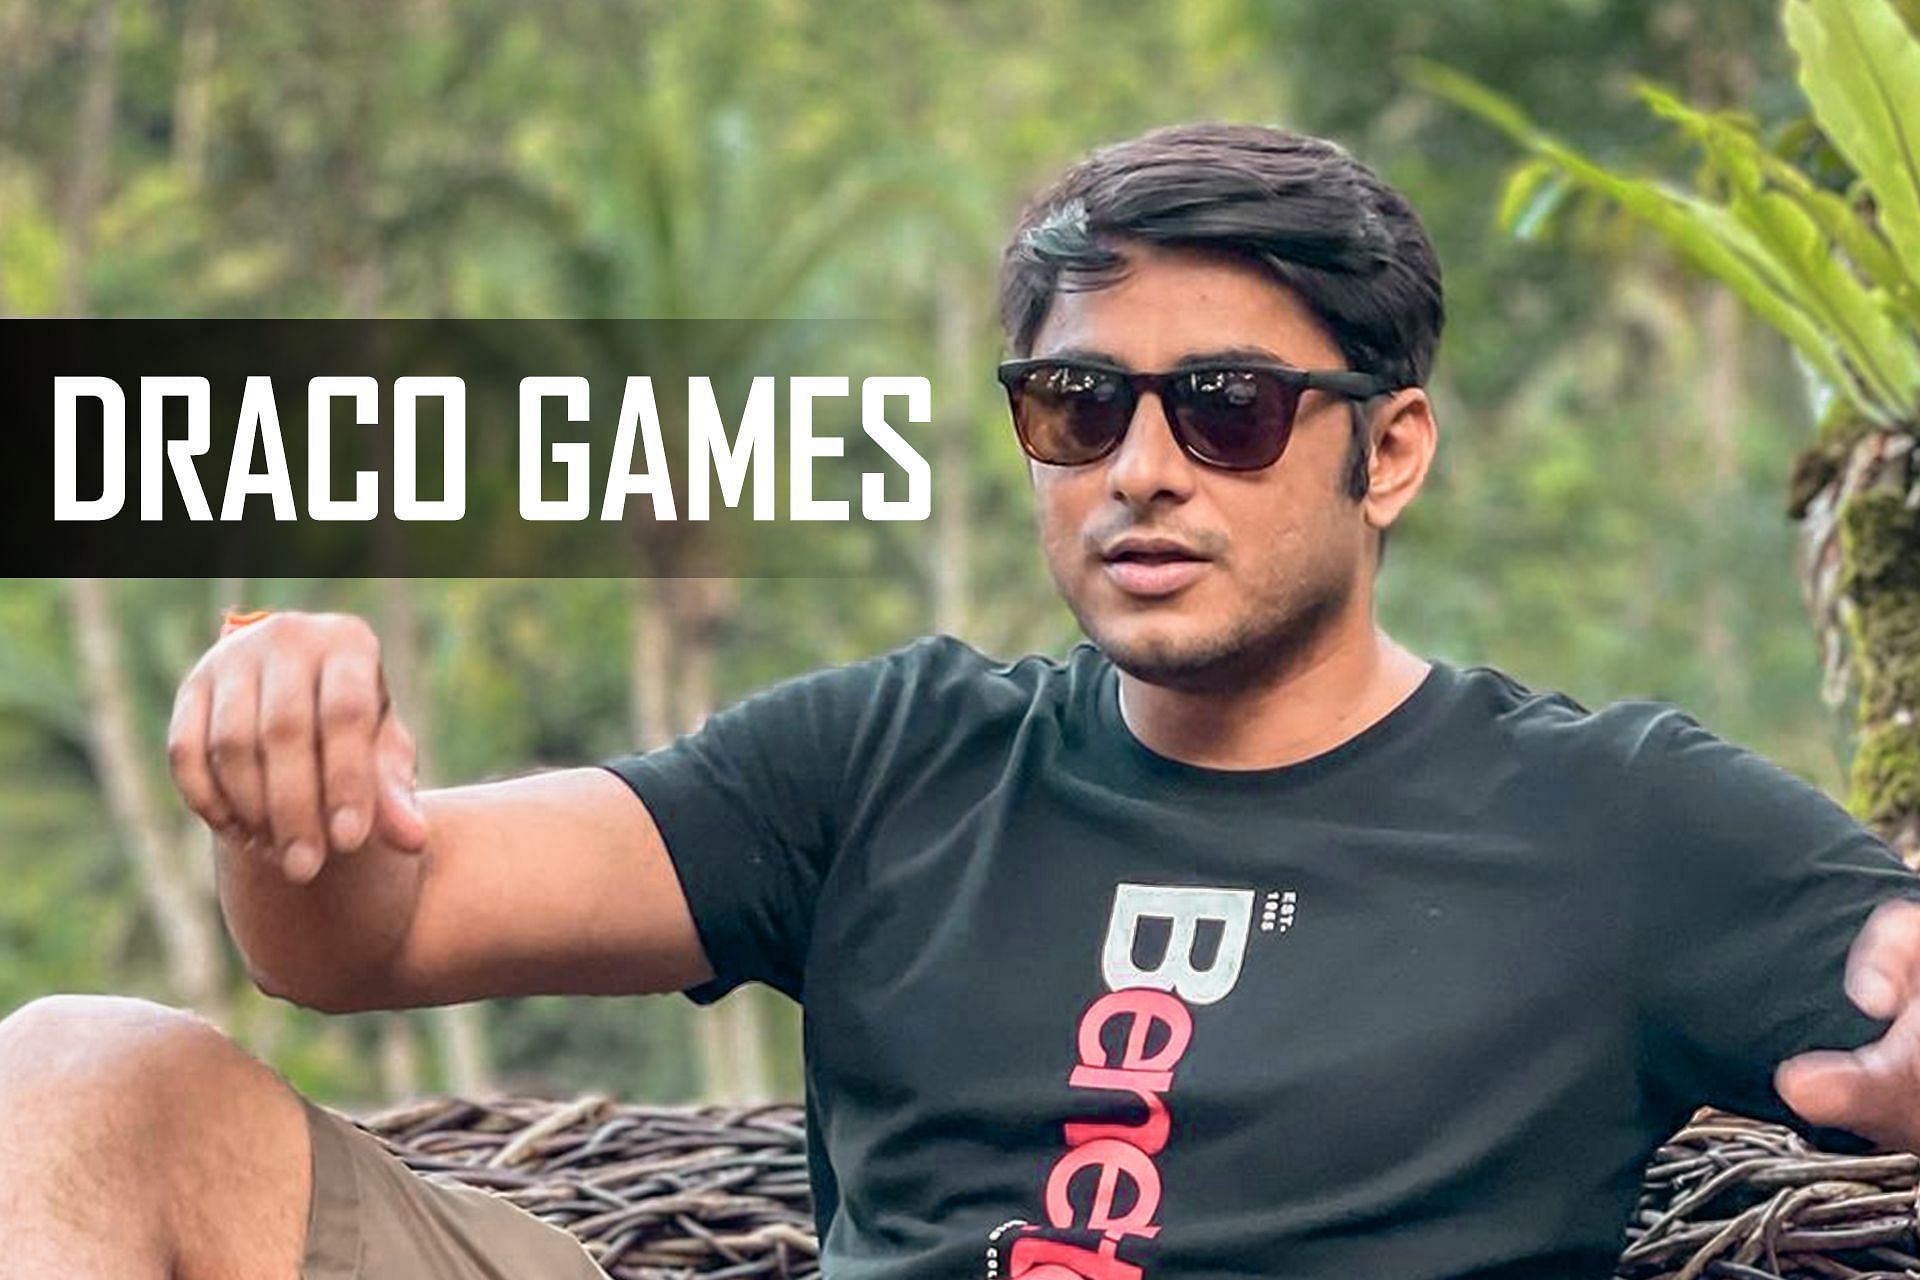 Draco Games is streaming BGMI live on his YouTube channel frequently (Image via Sportskeeda)